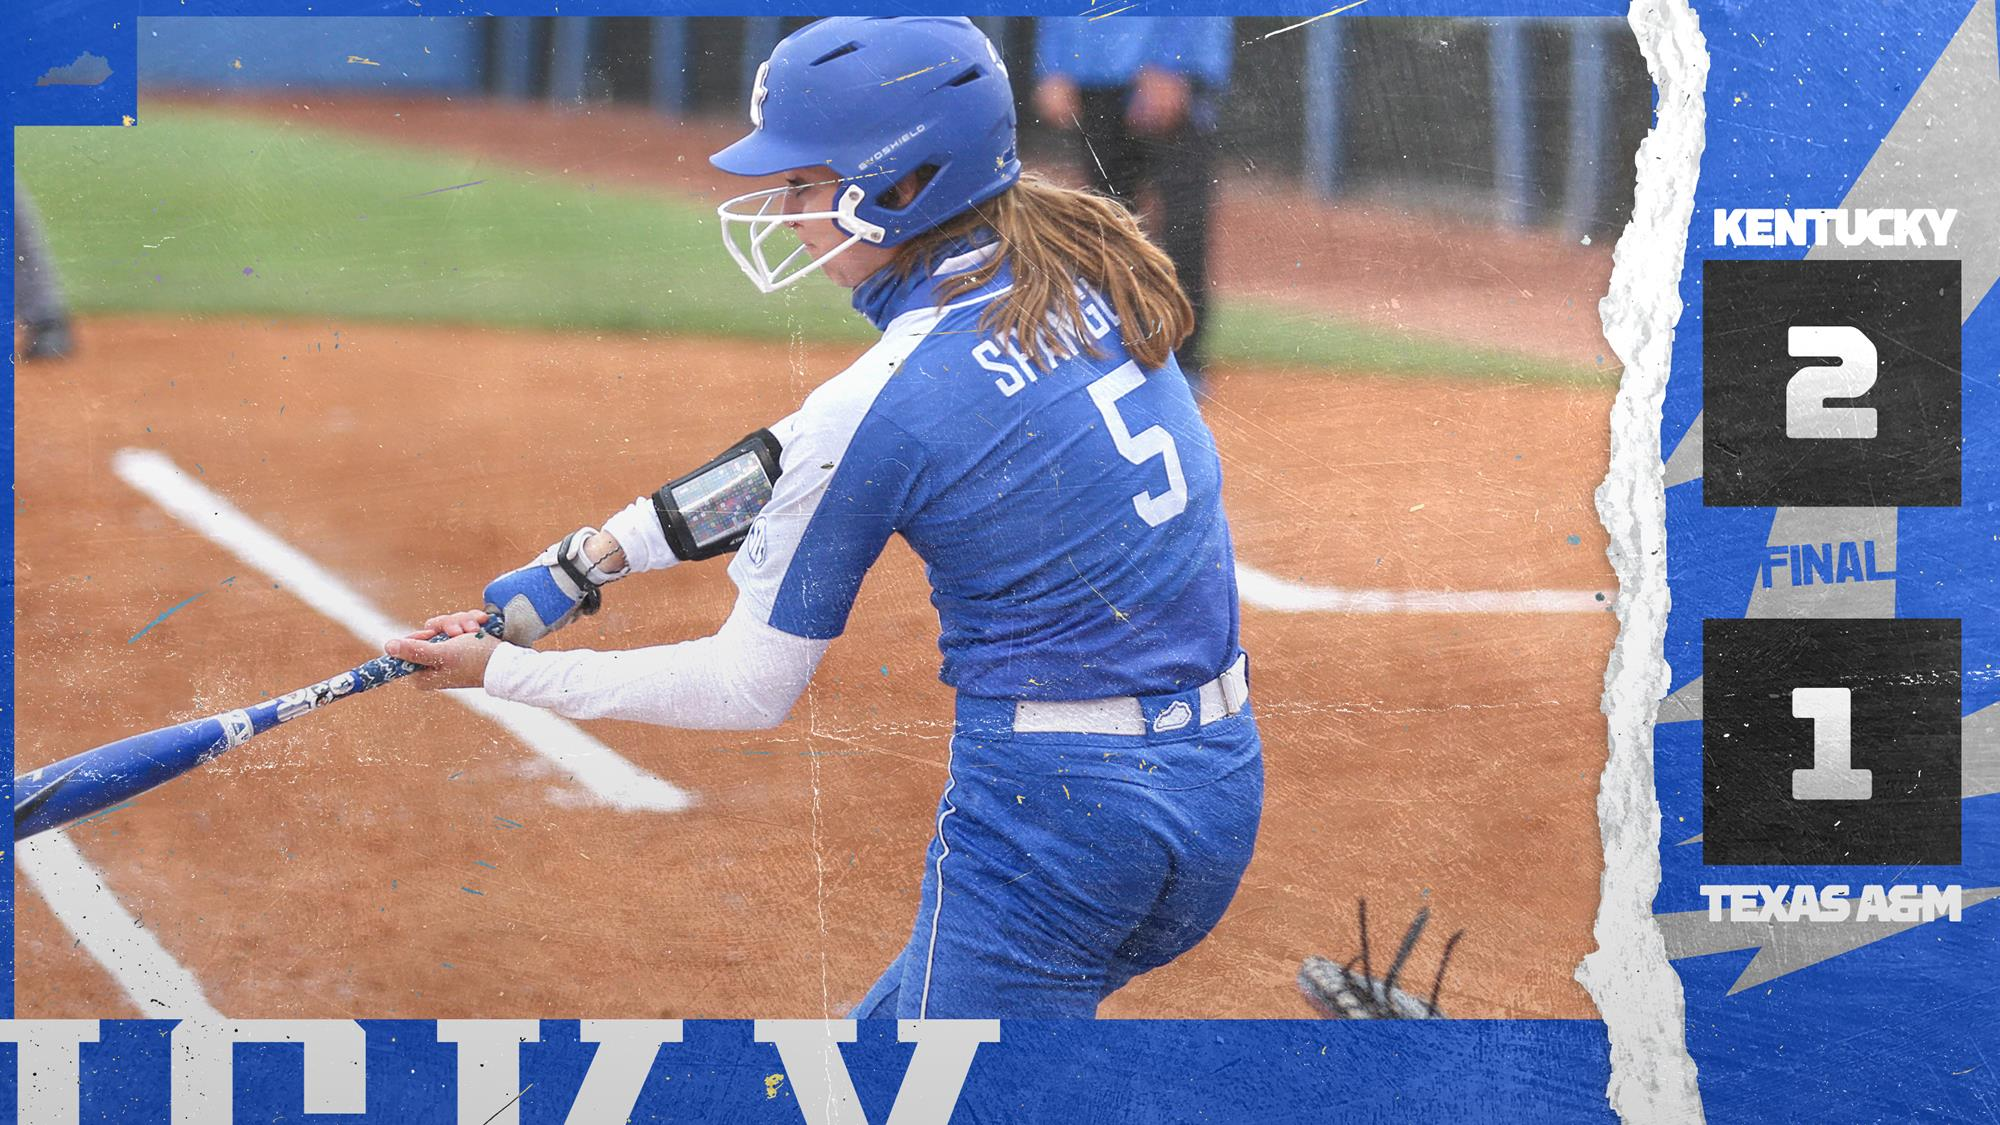 Humes Closes Baalman’s Gem as Kentucky Claims Series in Extras